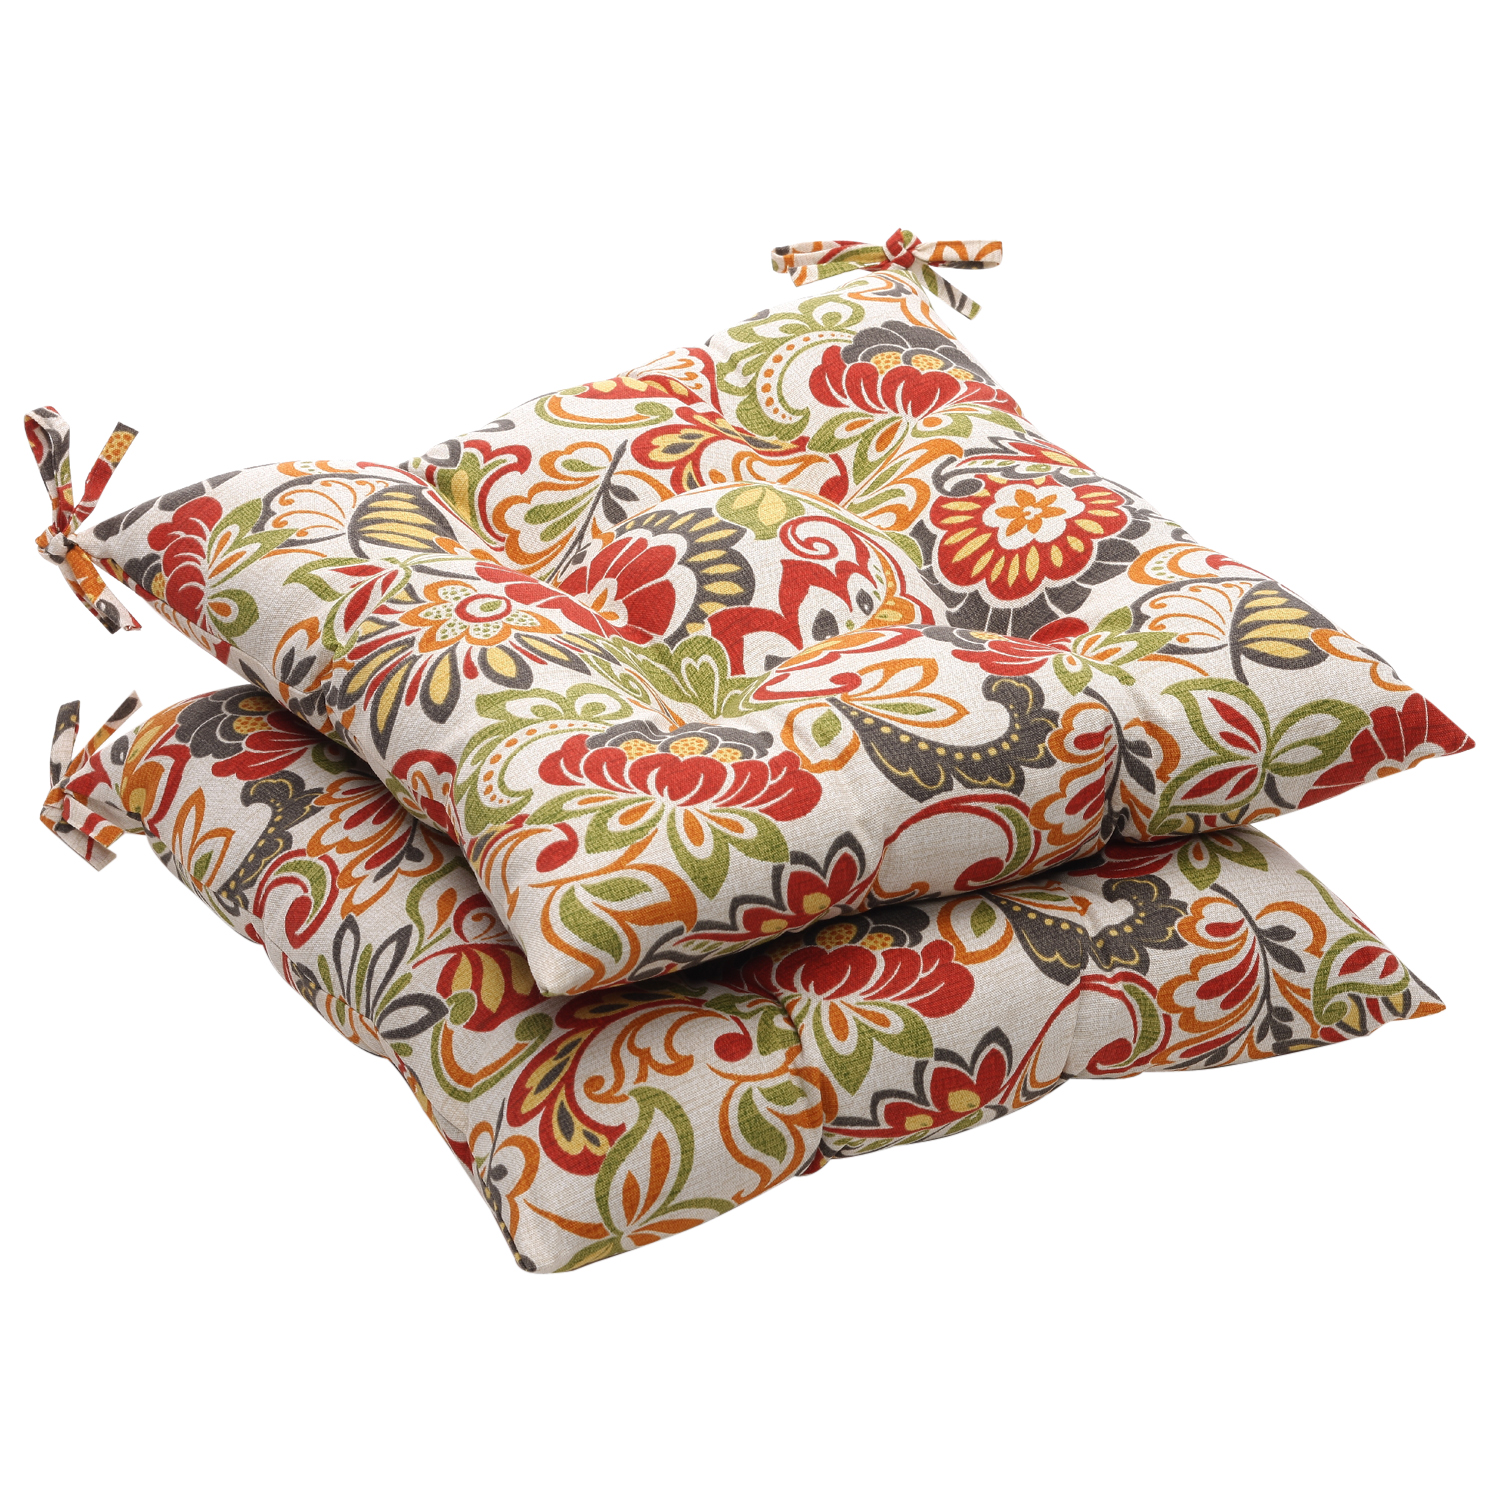 Pillow Perfect Set of 2 White and Red Tropical Floral Tufted Outdoor Patio Seat Cushions 19"